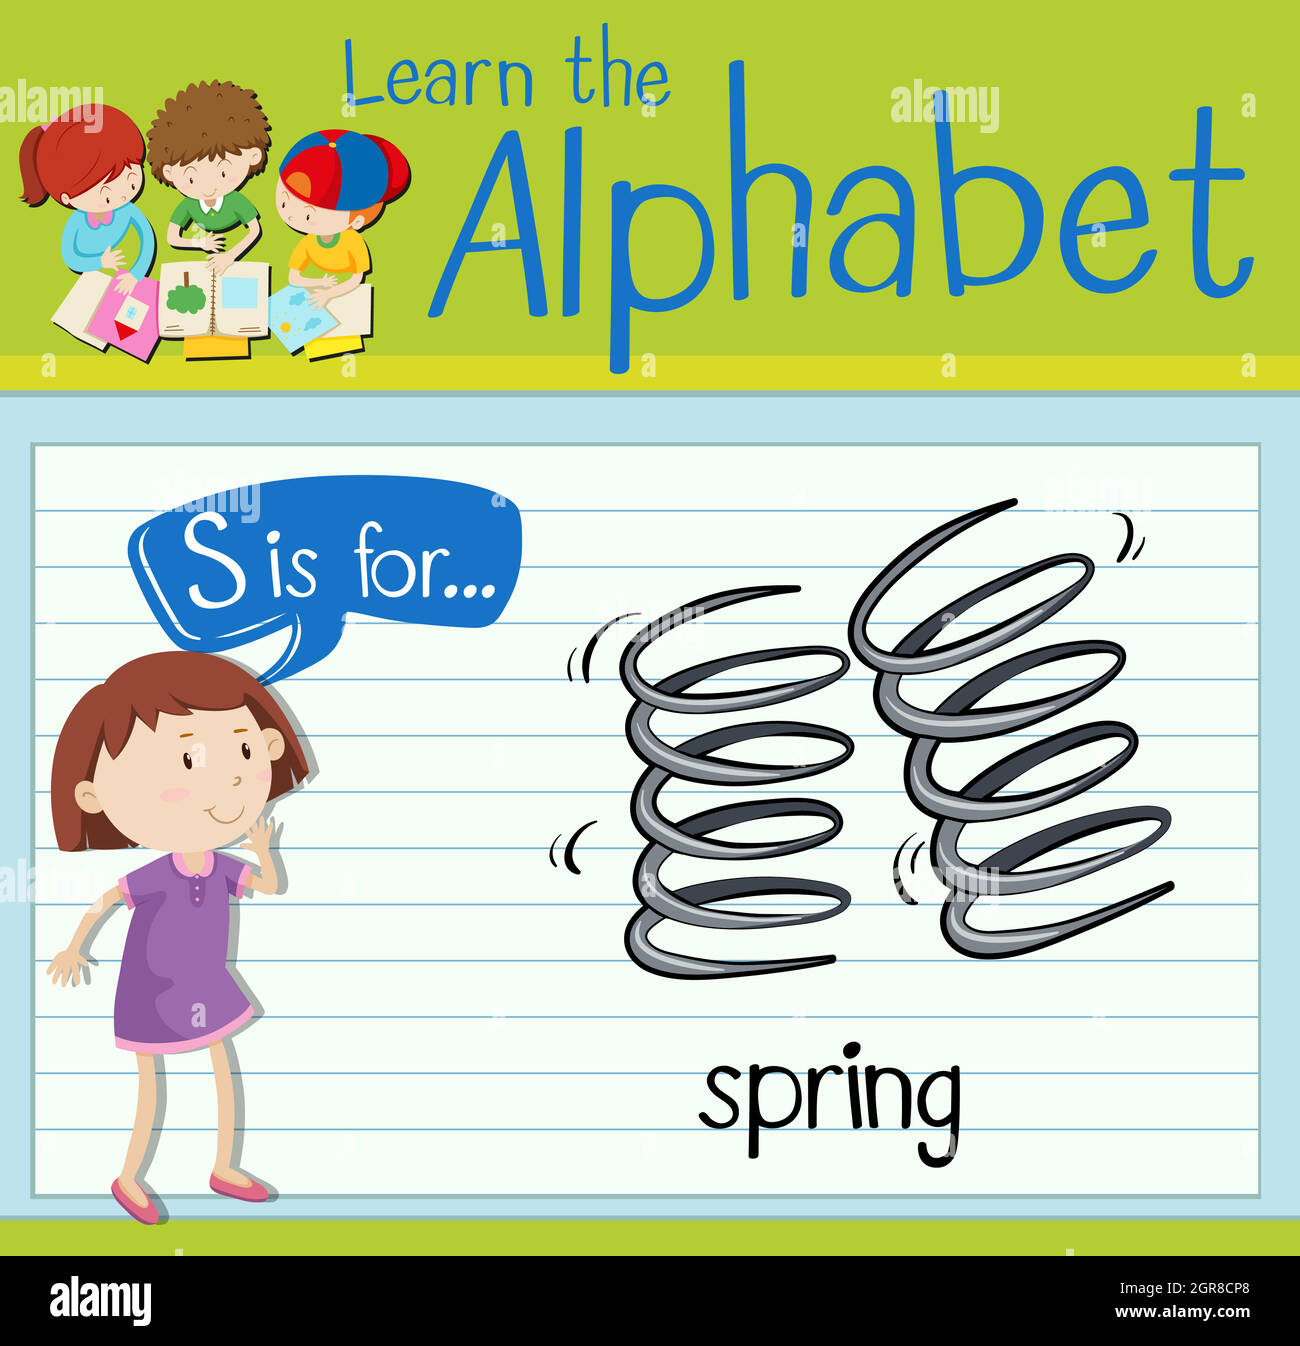 Flashcard letter S is for spring Stock Vector